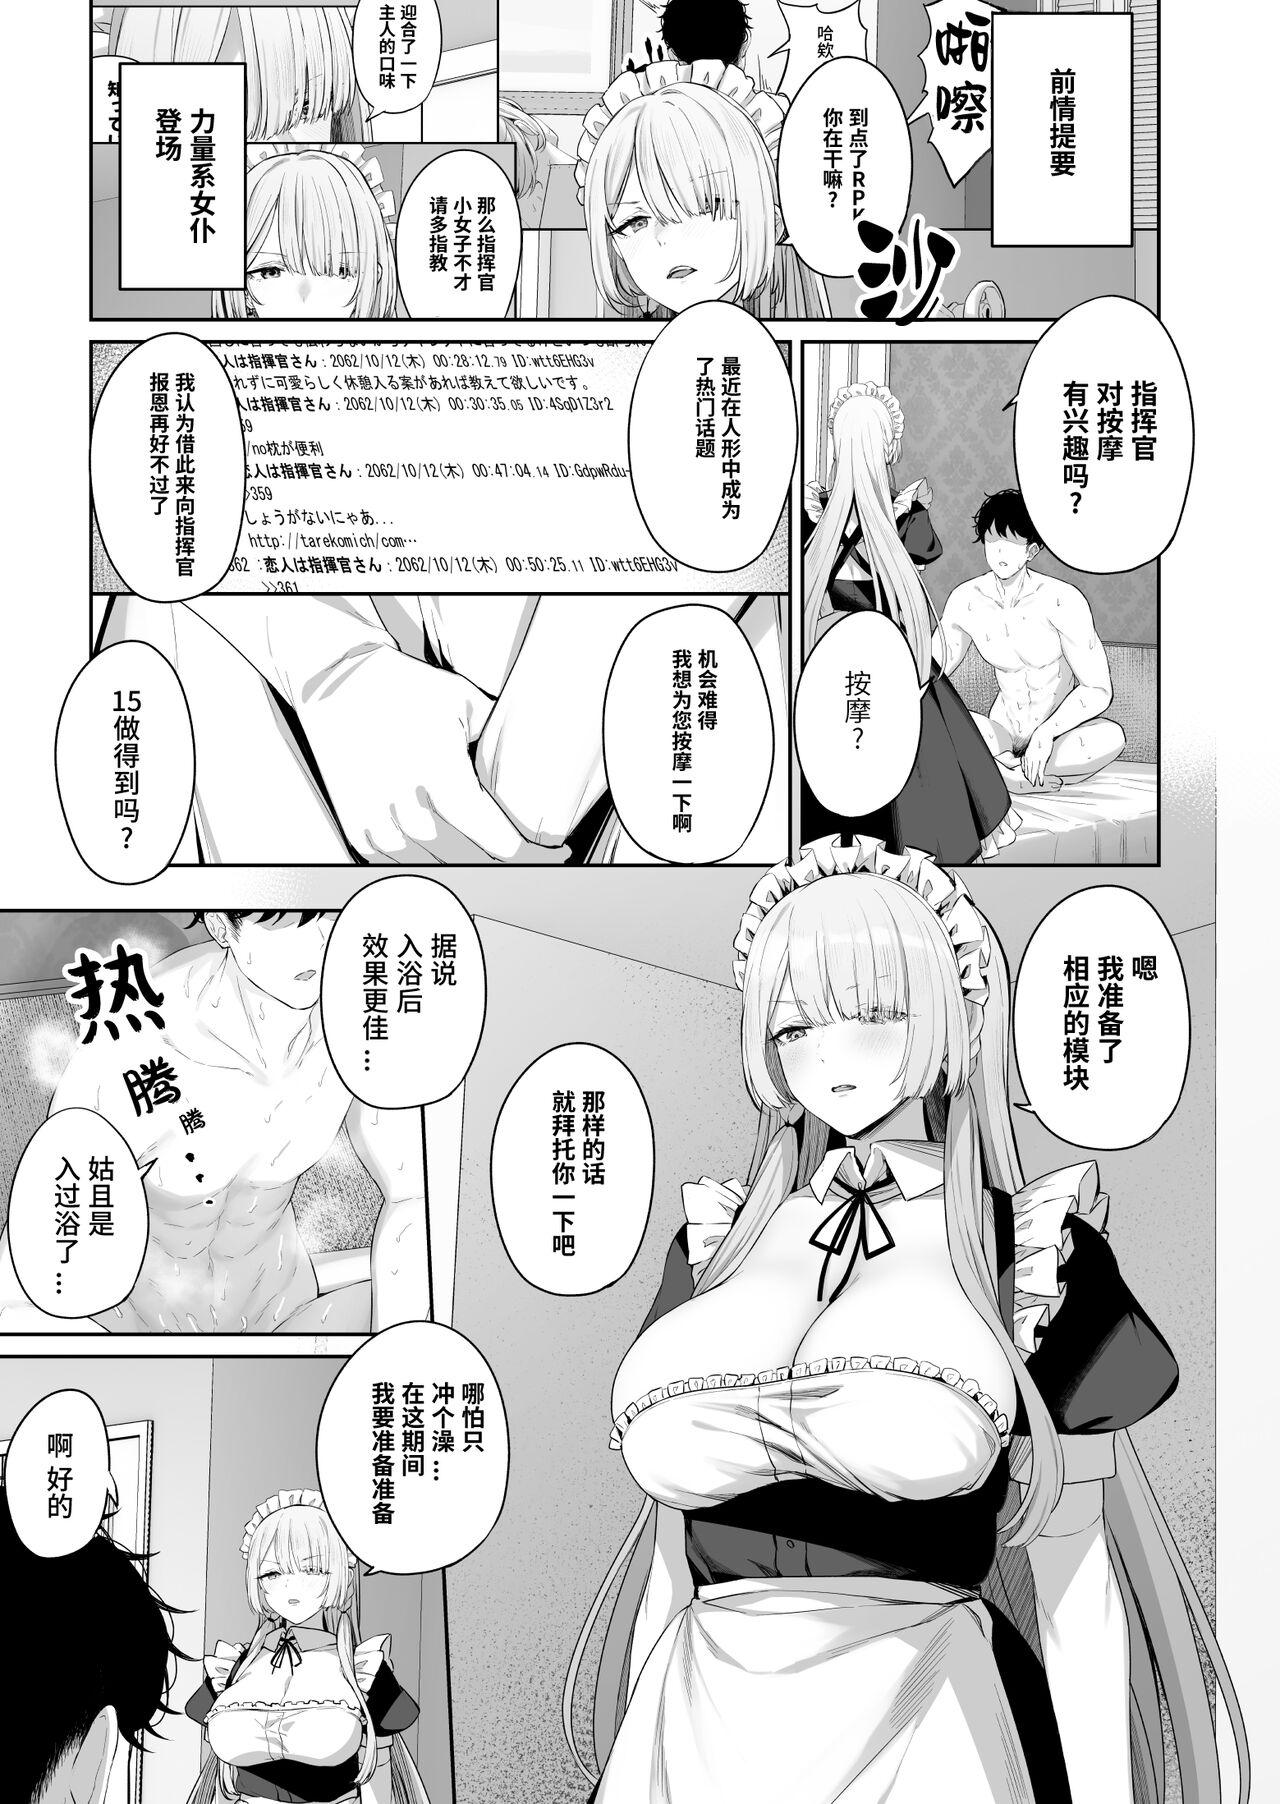 Pussylick AK15の進捗1 - Girls frontline Girl - Page 2